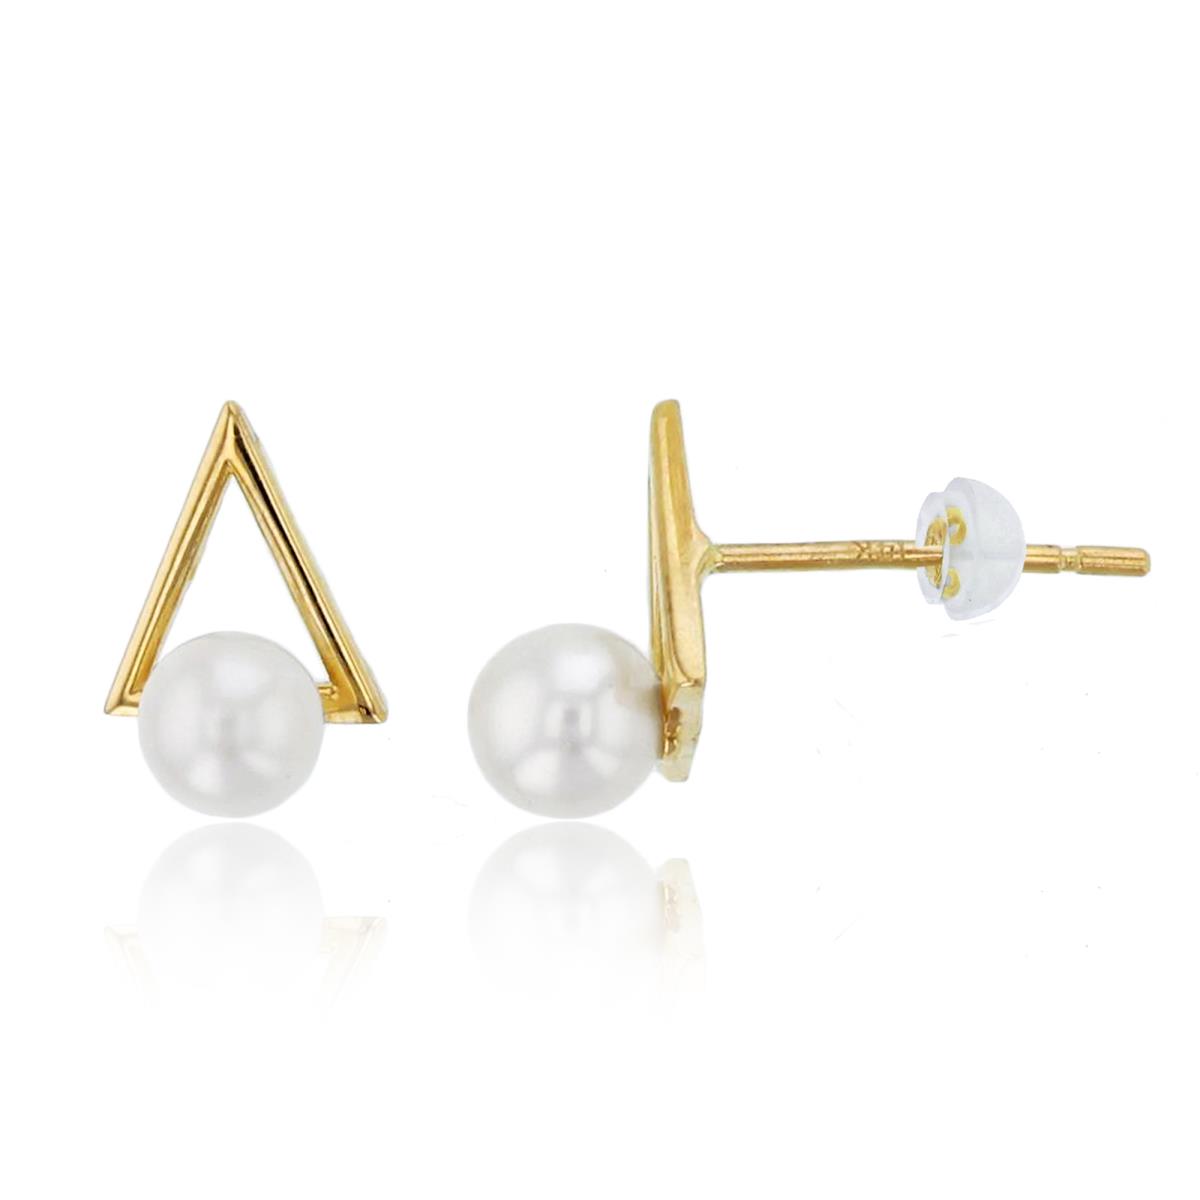 10K Yellow Gold 4mm Rnd Fresh Water Pearl Triangle Studs with Silicon Backs